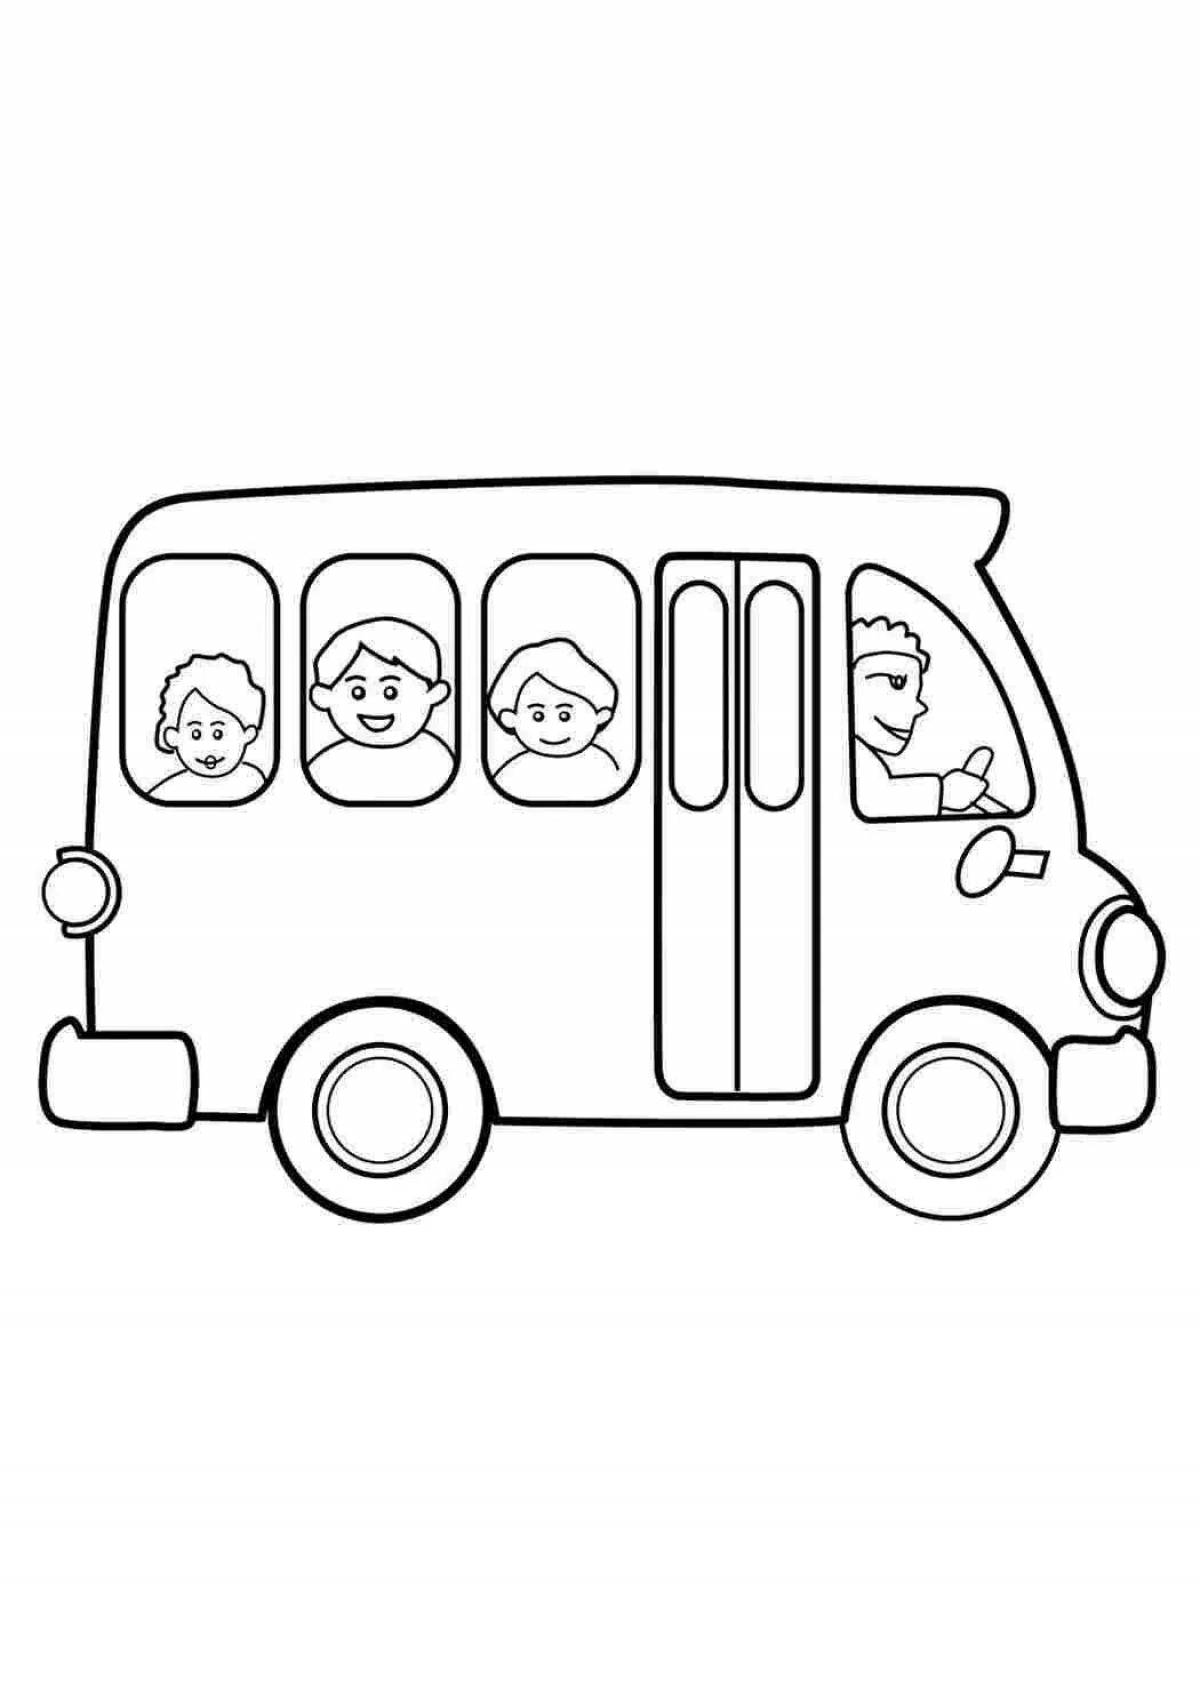 School bus coloring page with colorful sparkles